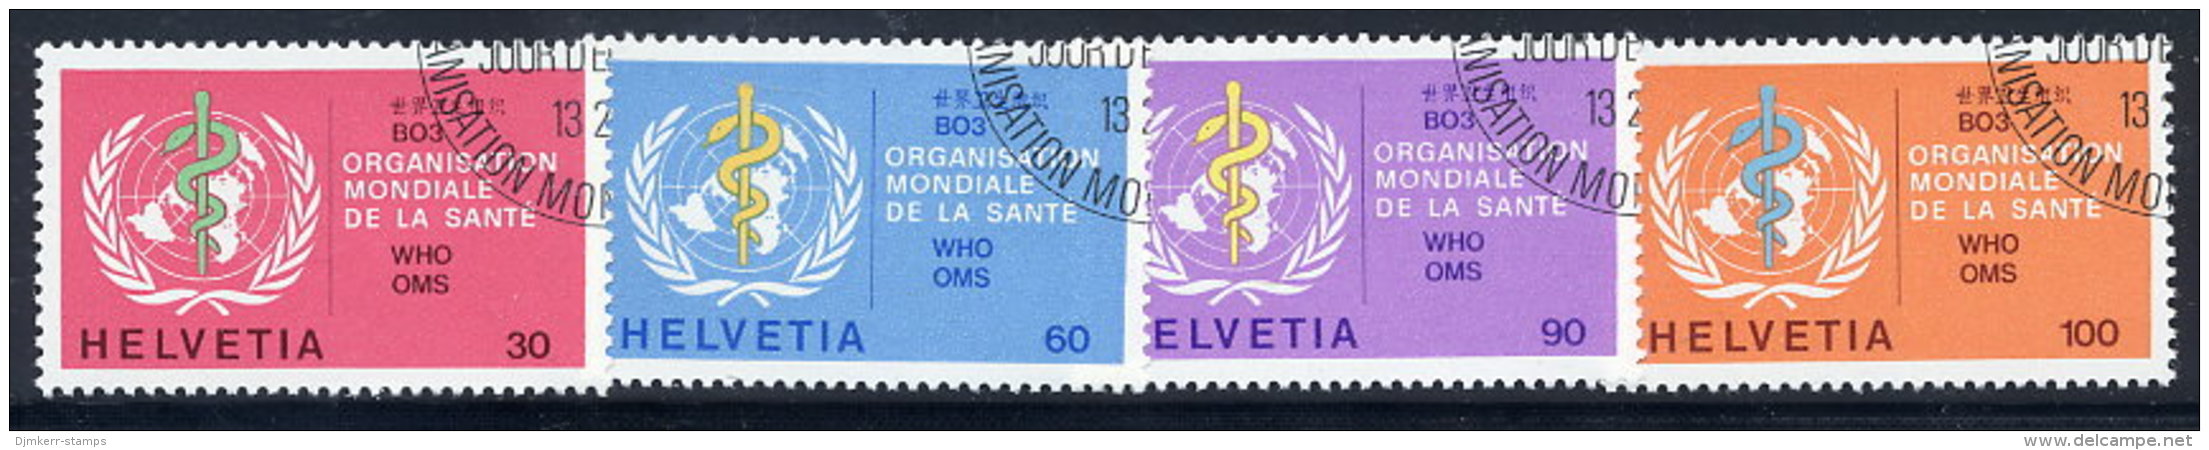 SWITZERLAND: WHO 1975 Emblem Set Of 4 In Blocks Of 4, Cancelled.  Michel 36-39 - Officials